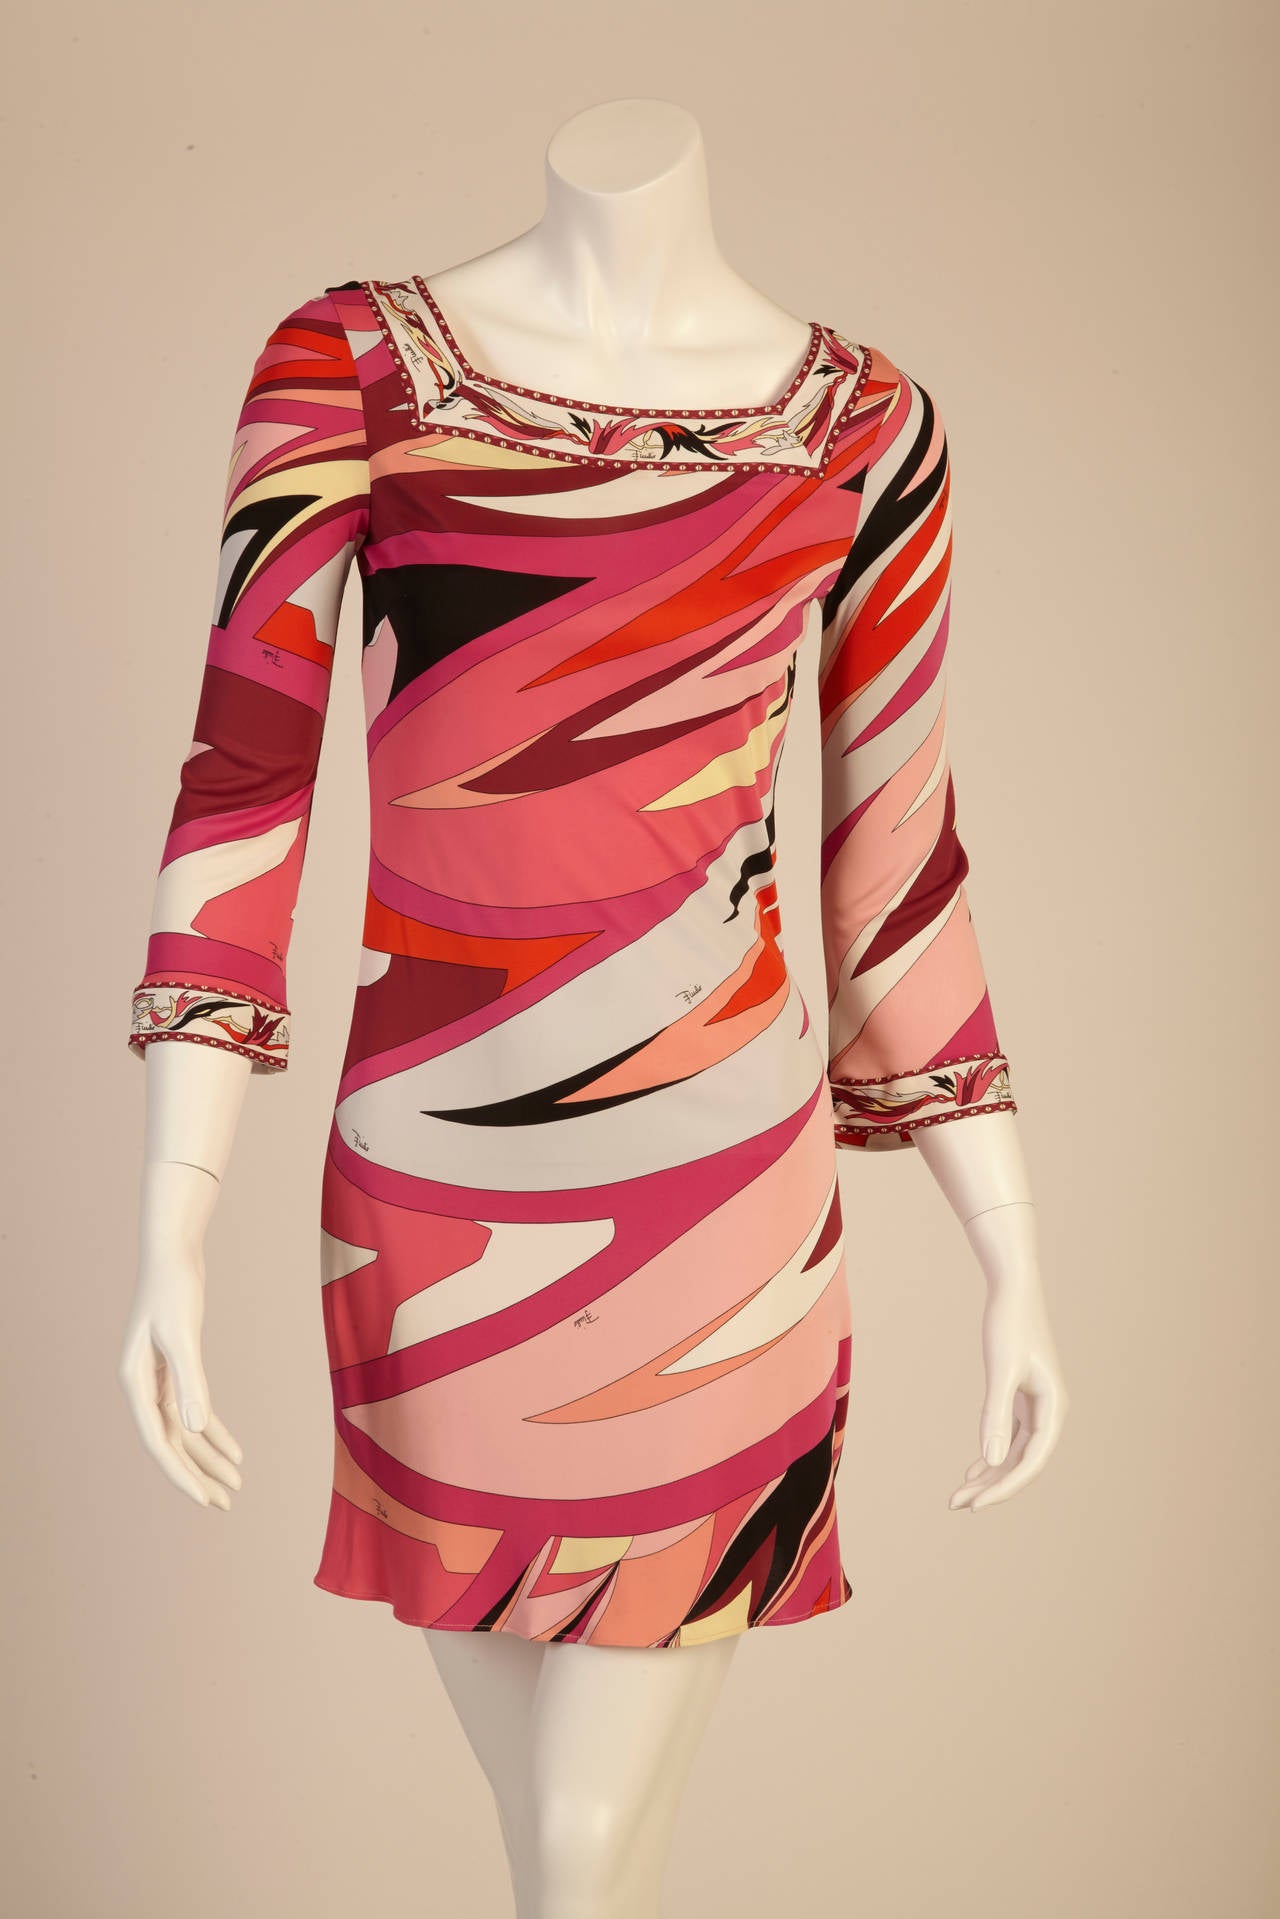 This exquisite dress in its printed silk blend is an Emilio Pucci classic. Contains a stunning square neckline and ¾ sleeves. A decorative, printed border trims the square neckline and cuffs. Adds a wonderful splash of coral colors to any casual or